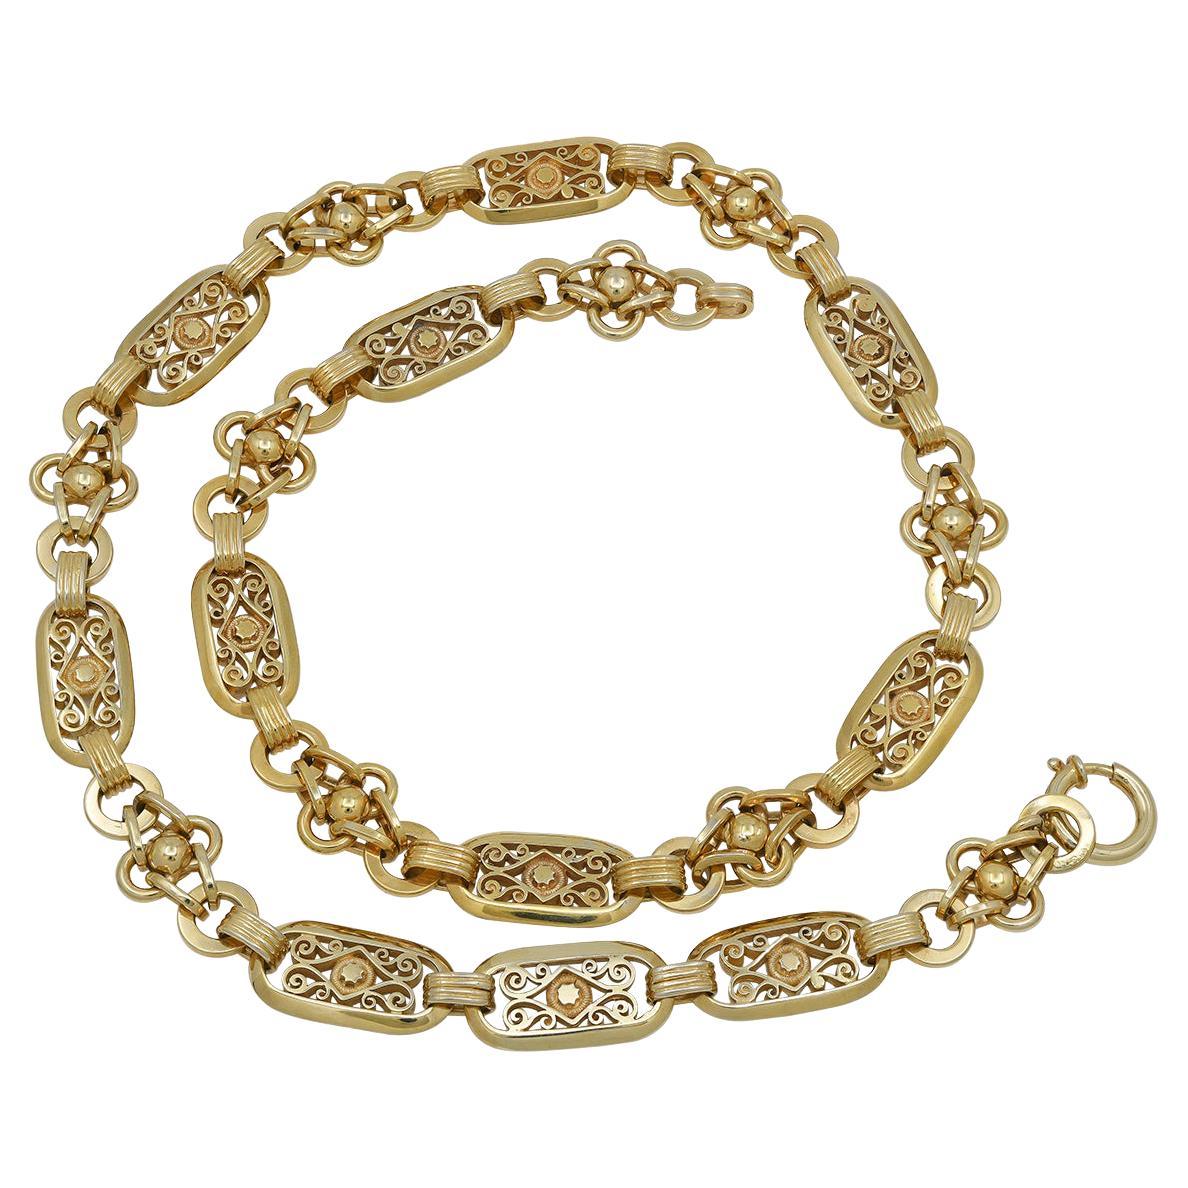 Antique Gold Watch Chain For Sale